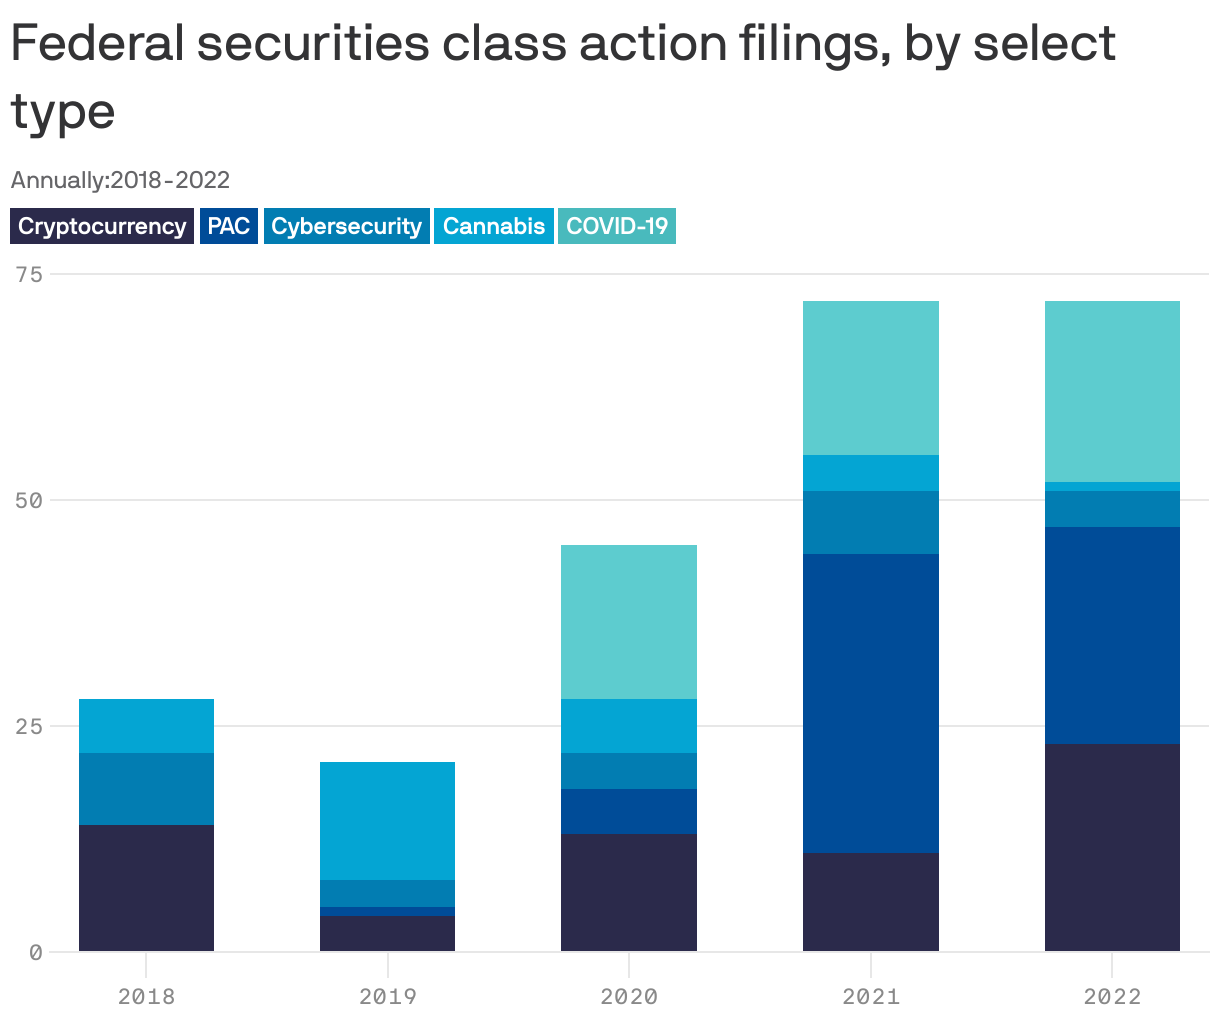 Federal securities class action filings, by select type